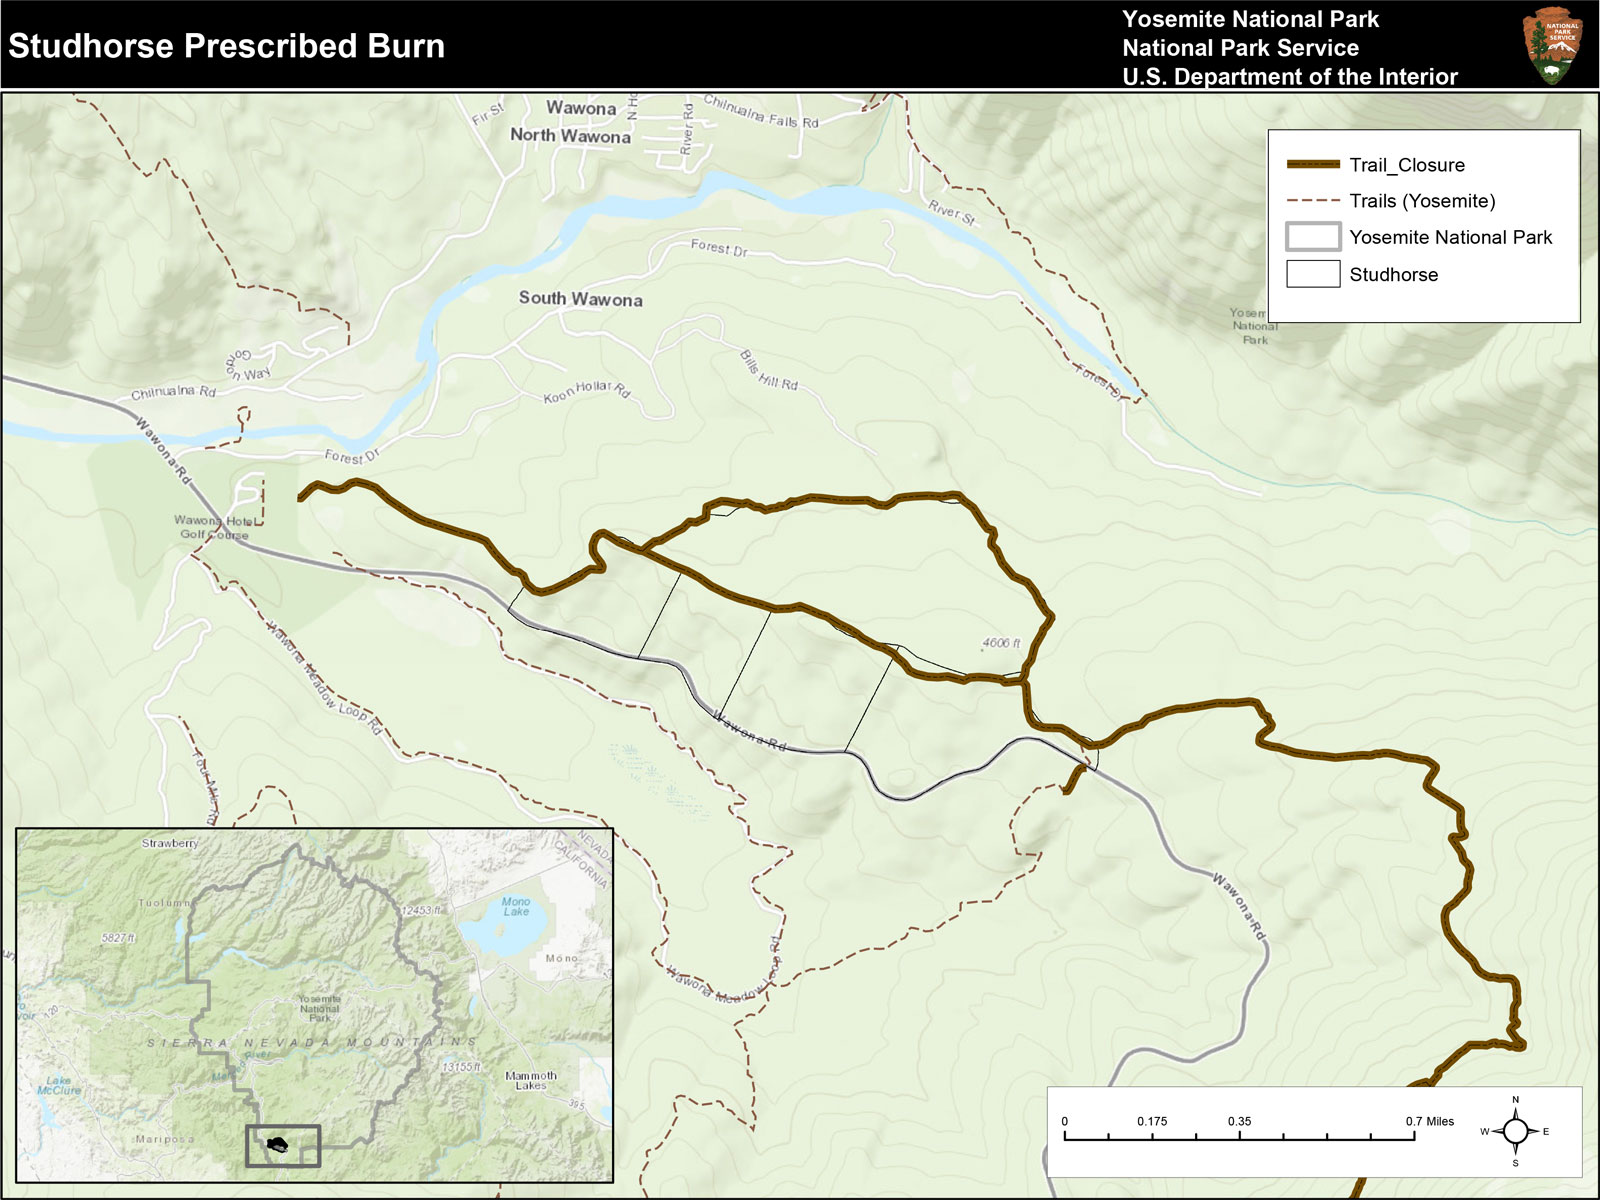 Map showing the area between Wawona and Wawona Meadow, east of Wawona Hotel as a burn area with